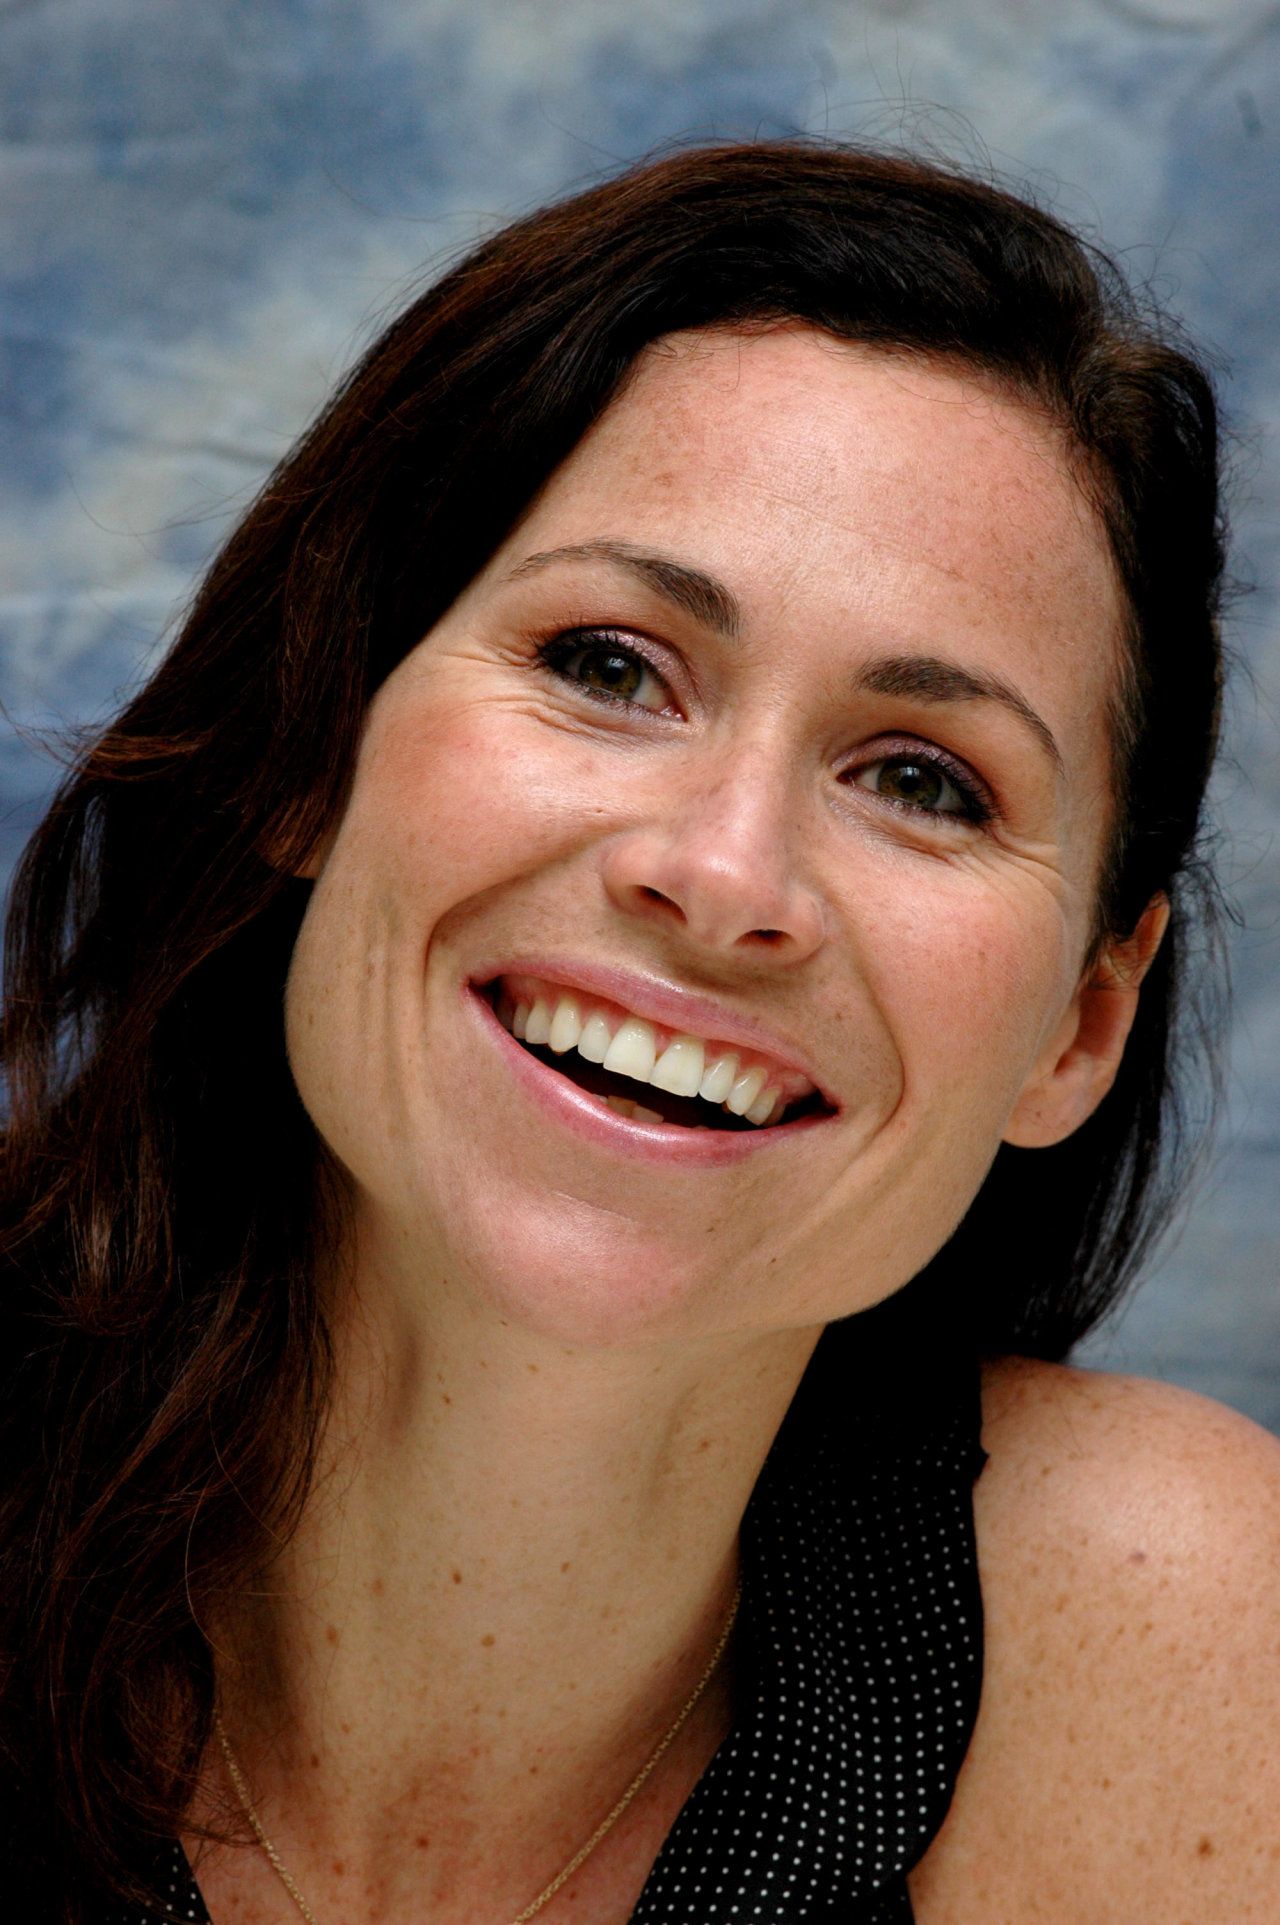 Minnie Driver leaked wallpapers